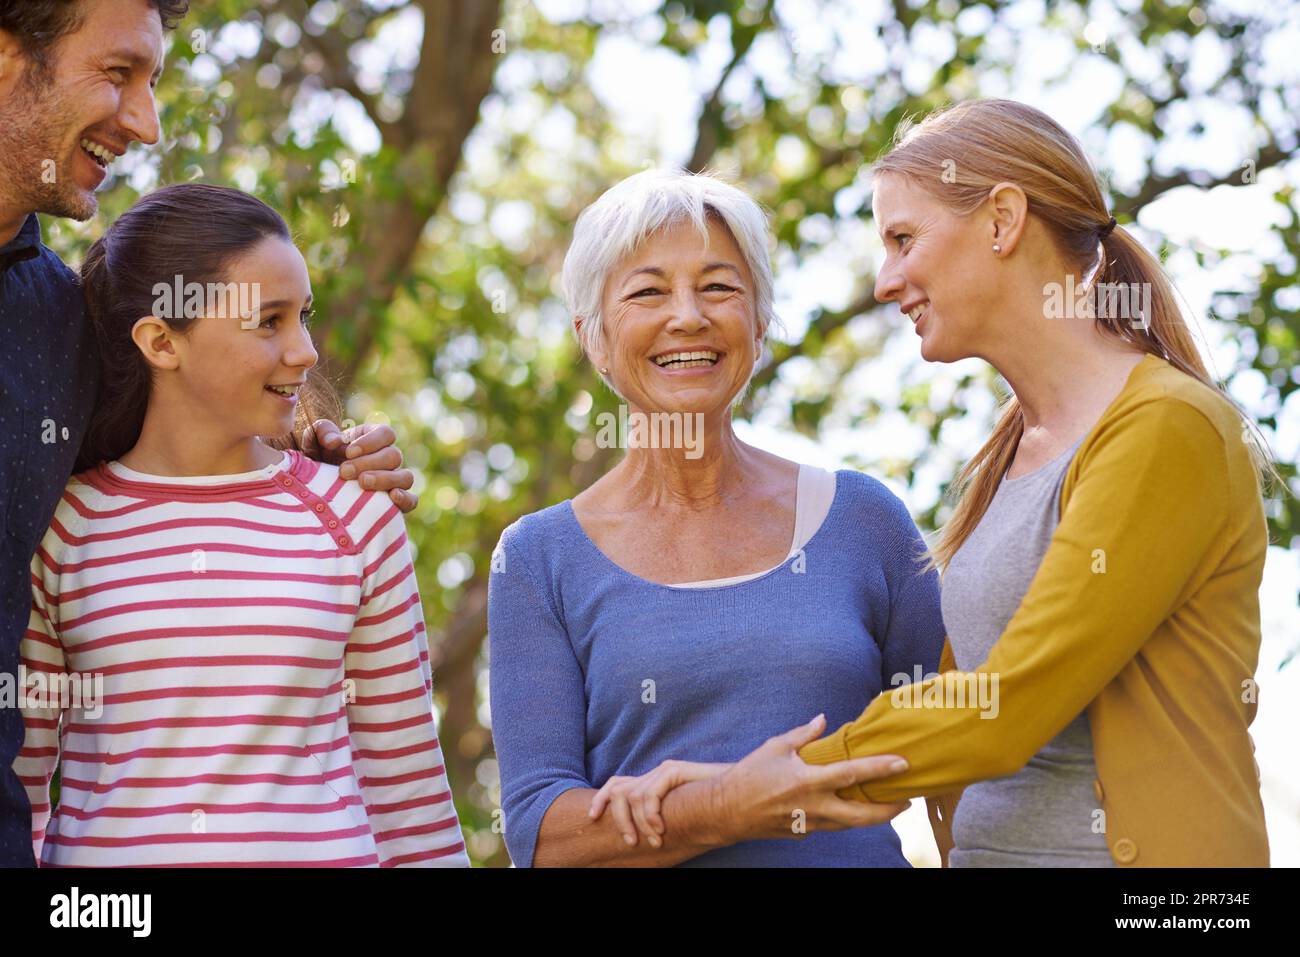 The family matriarch. Shot of a family standing together outside in the garden. Stock Photo